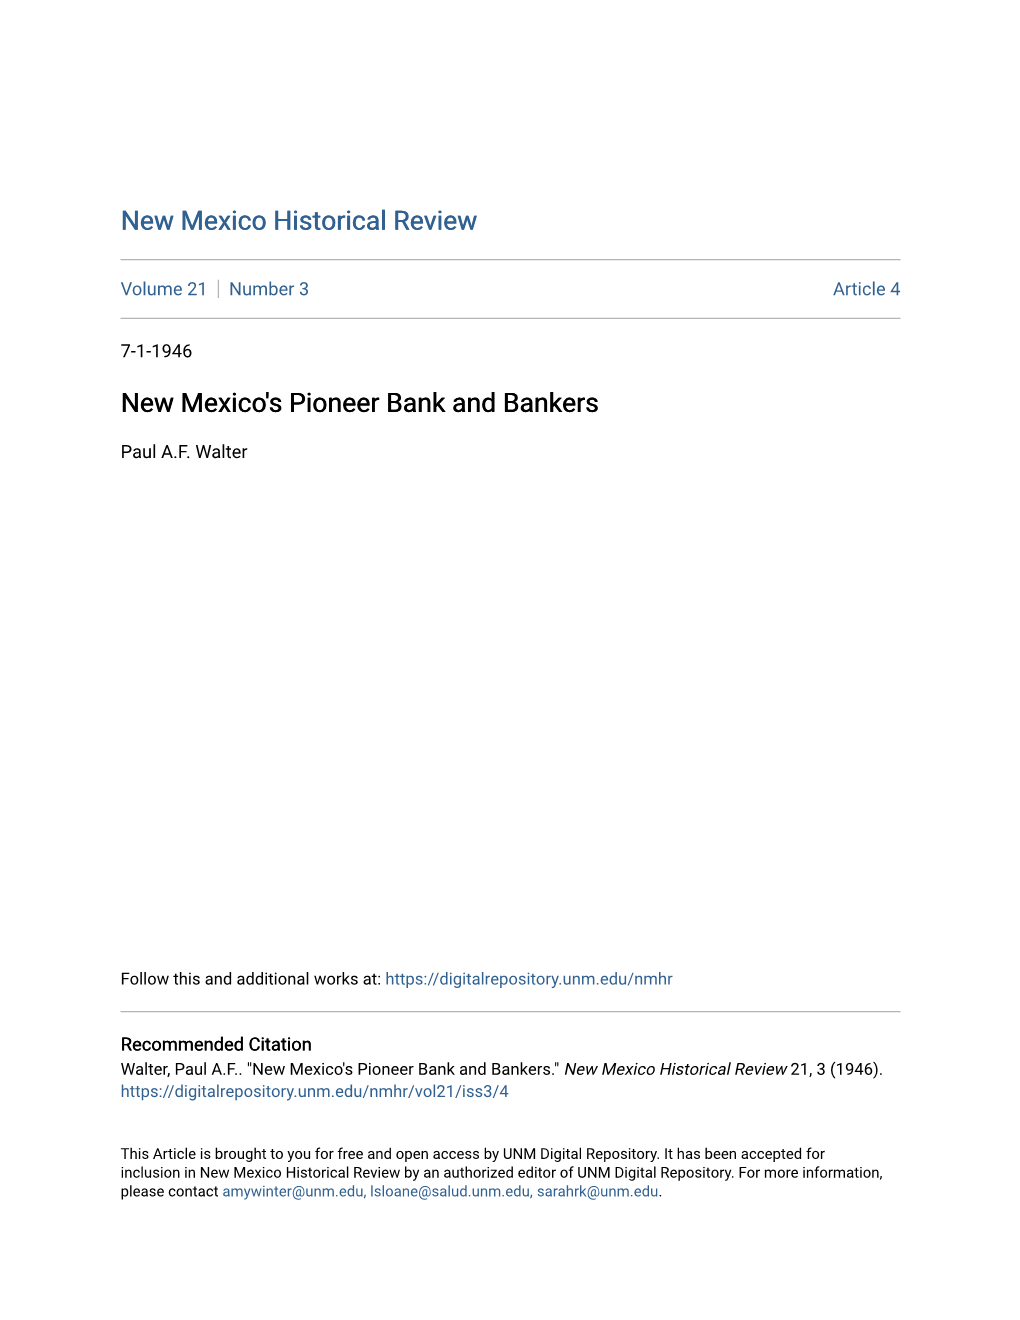 New Mexico's Pioneer Bank and Bankers